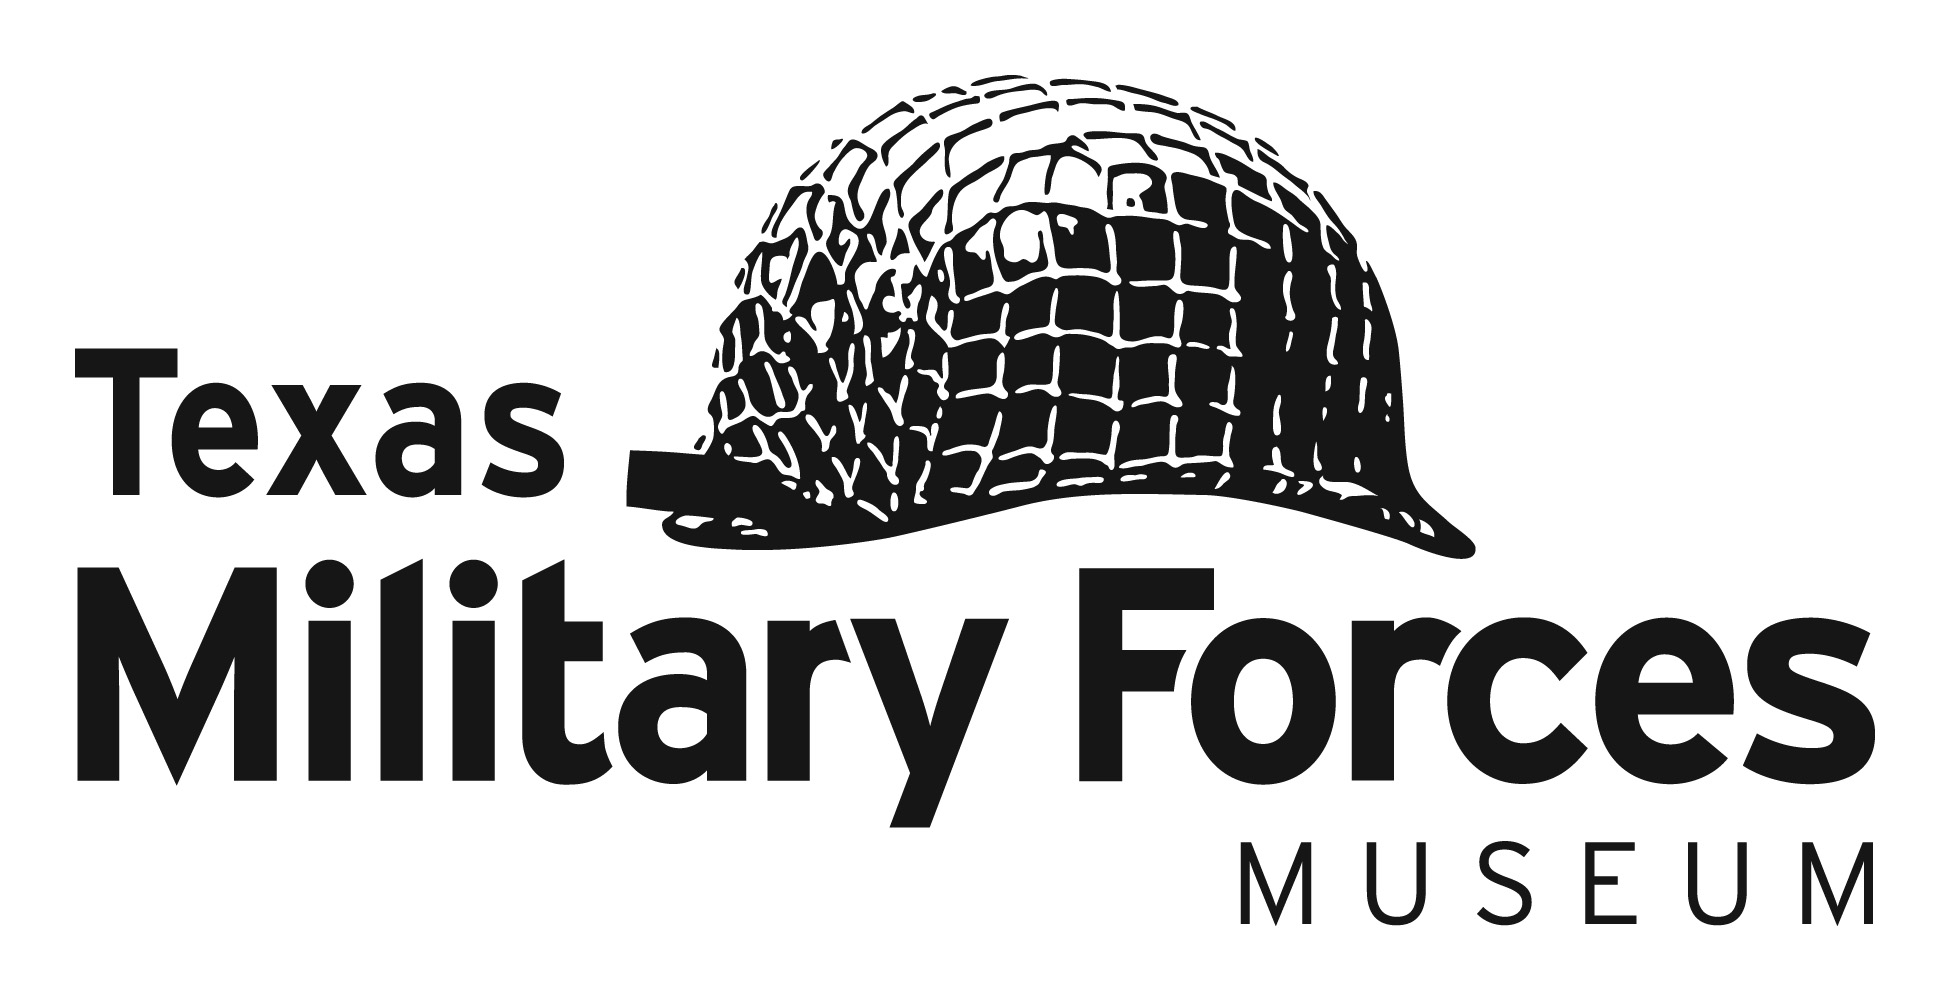 Texas Military Forces Museum Logo